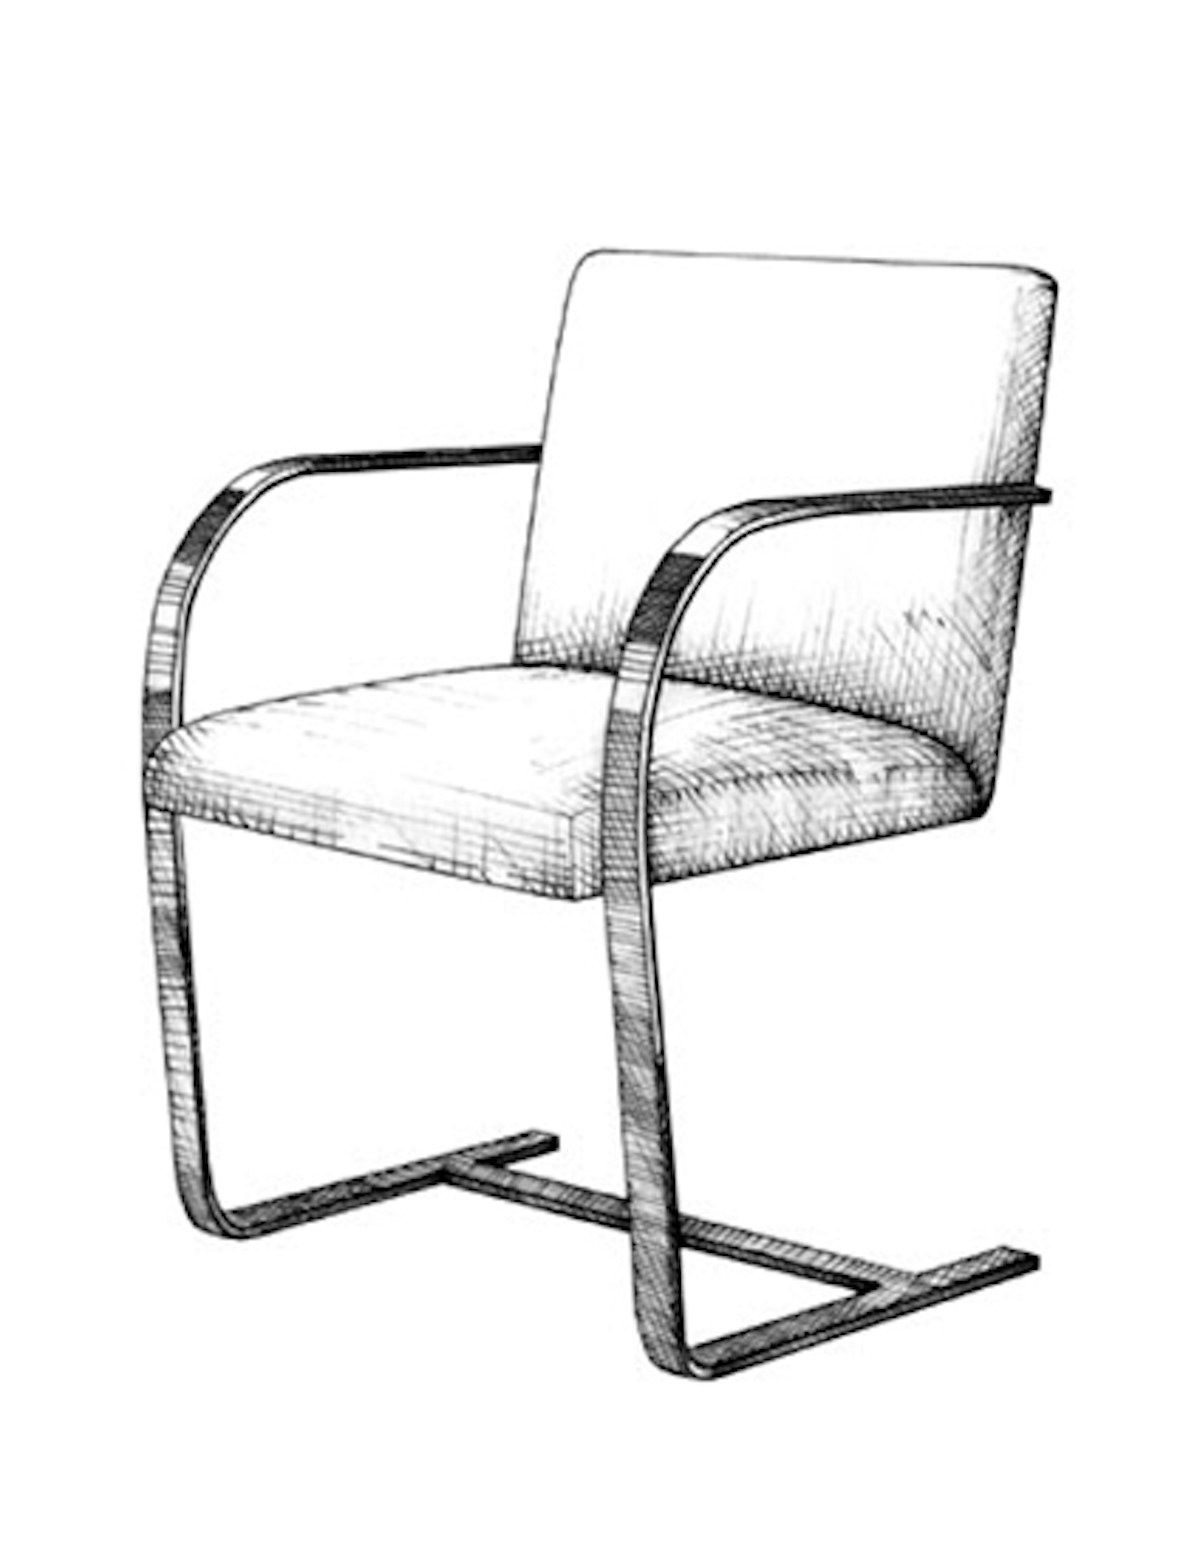 The Best of Chair Design - Top 10 Chair Styles - Cantilever chair